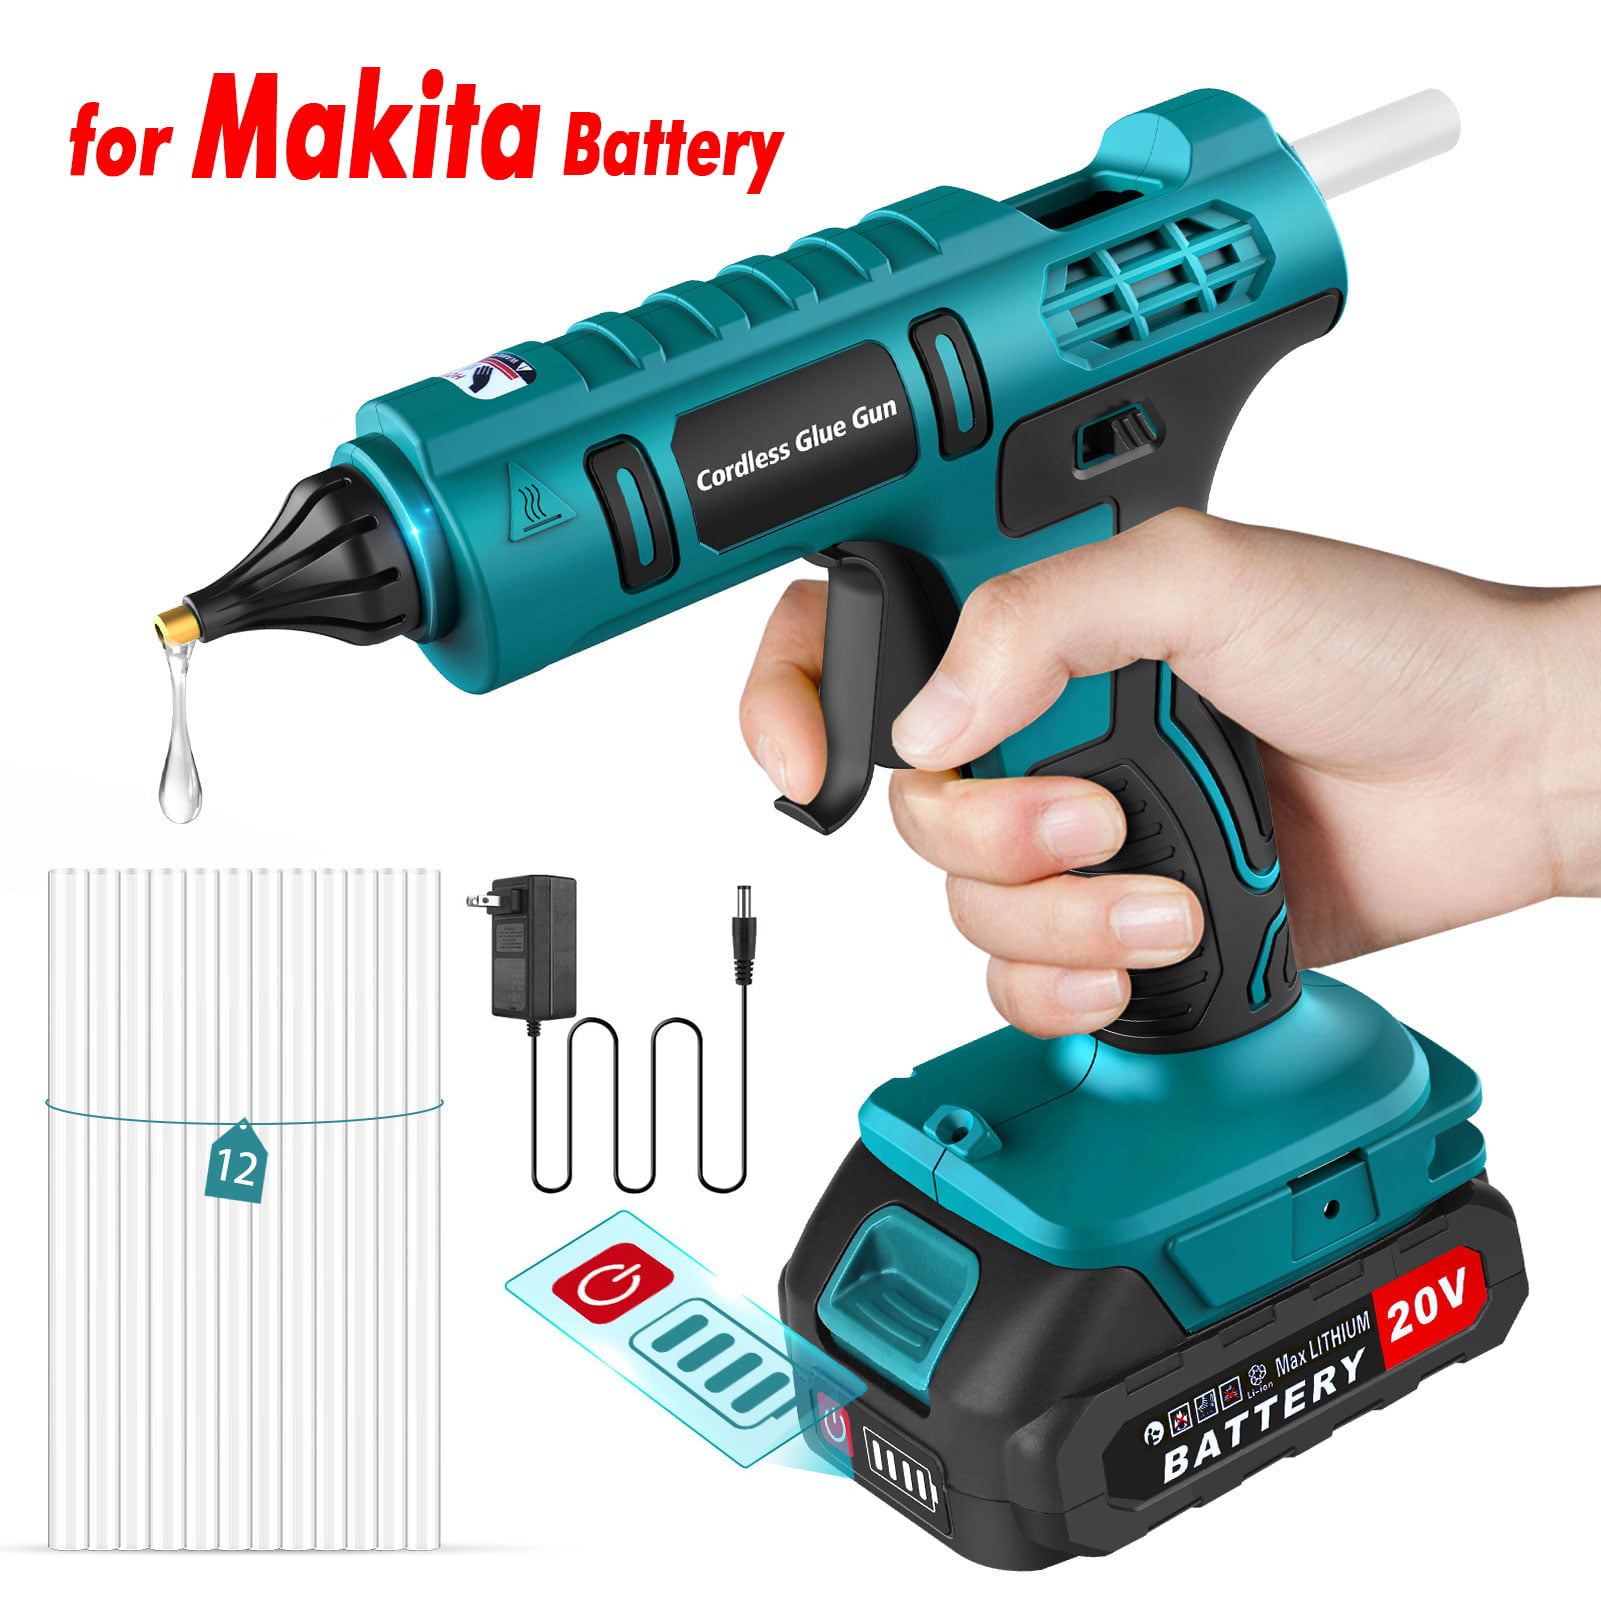  WORKSITE Cordless Hot Glue Gun, 20V 2.0 Ah Li-ion Battery  Powered Glue Gun Full Size with 12 Pcs Glue Sticks for Arts & Crafts & DIY,  Charger Included, Gray : Arts